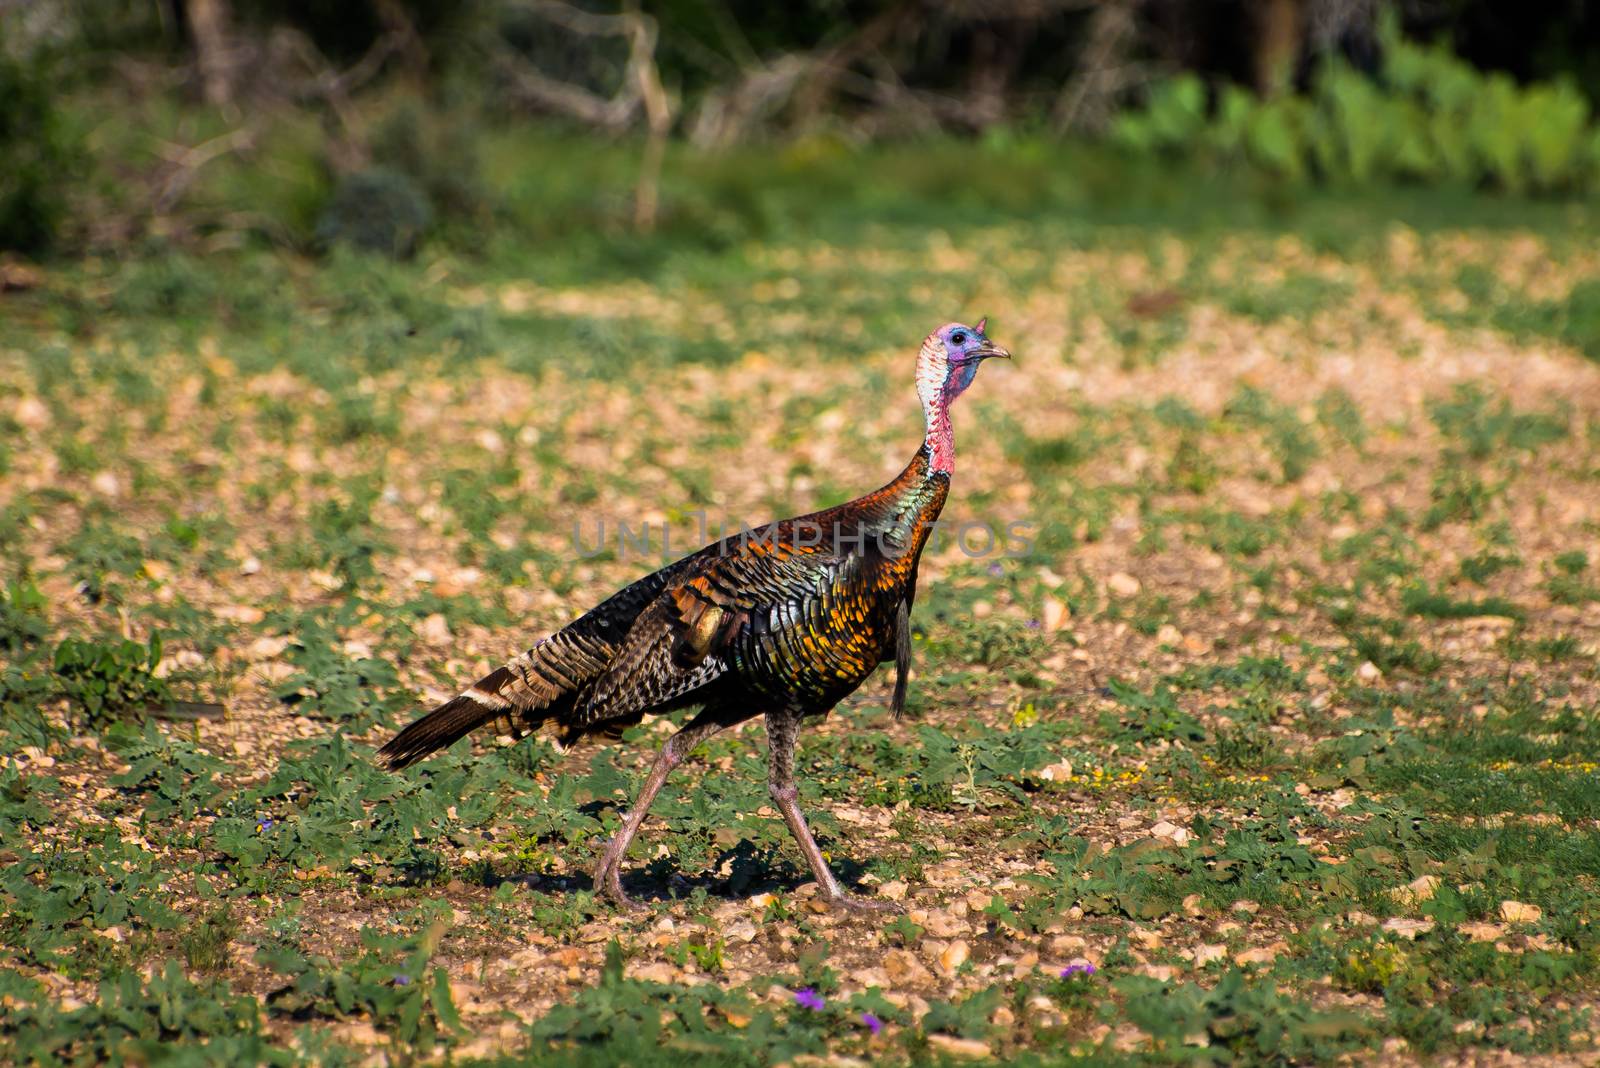 Wild South Texas Rio Grande turkey walking to the right in a field